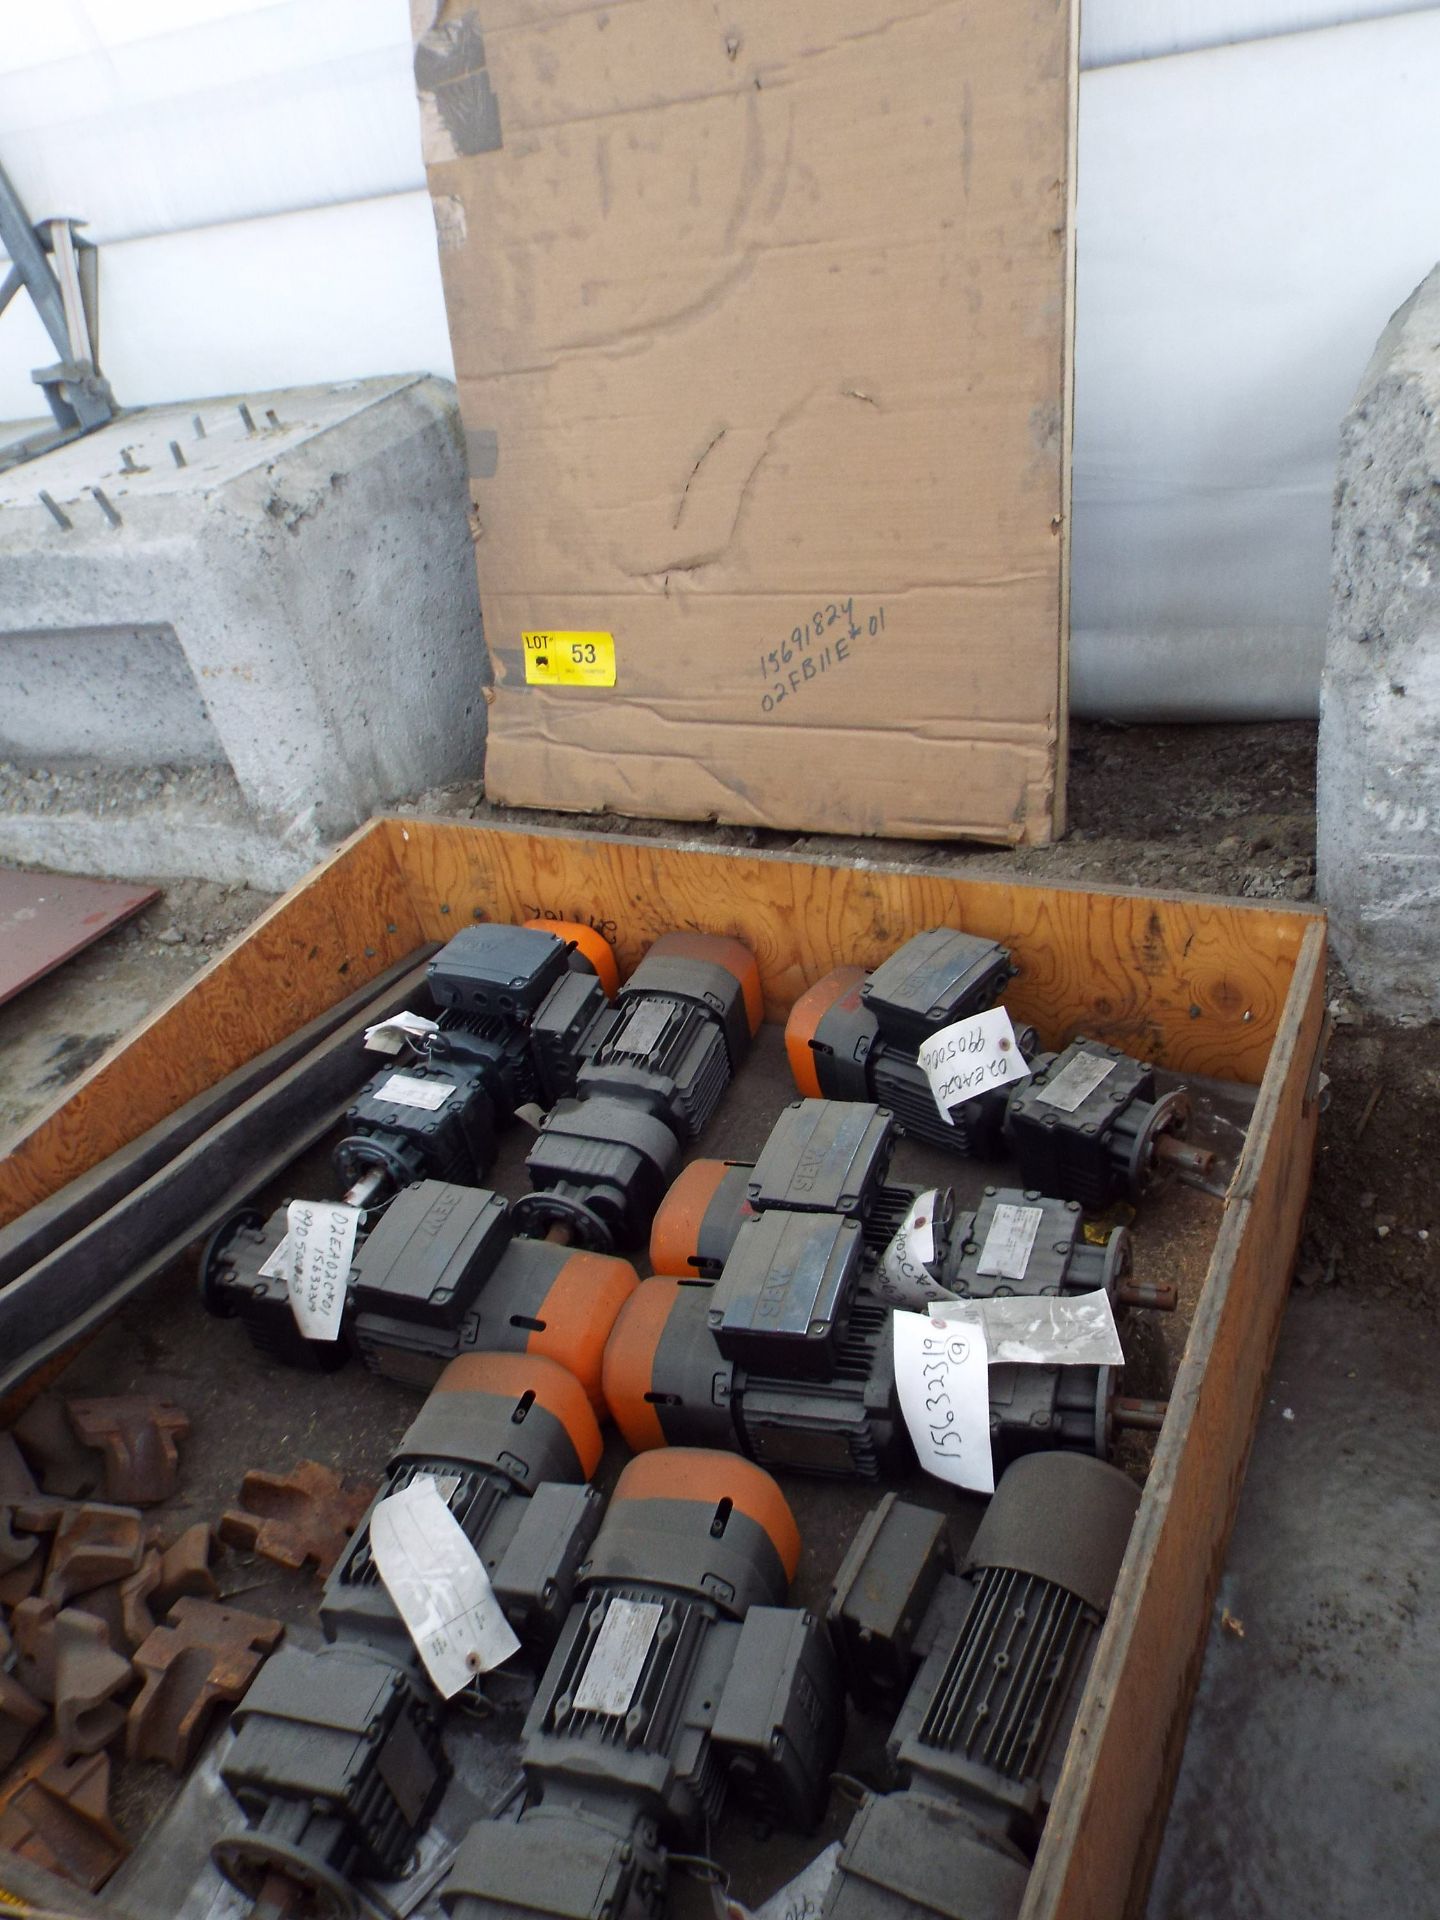 LOT/ CONTENTS OF SKID - (9) SEW EURODRIVE 22.32:1 GEARBOXES WITH 0.20/0.82 HP, 575V, 830/37 / 3340/